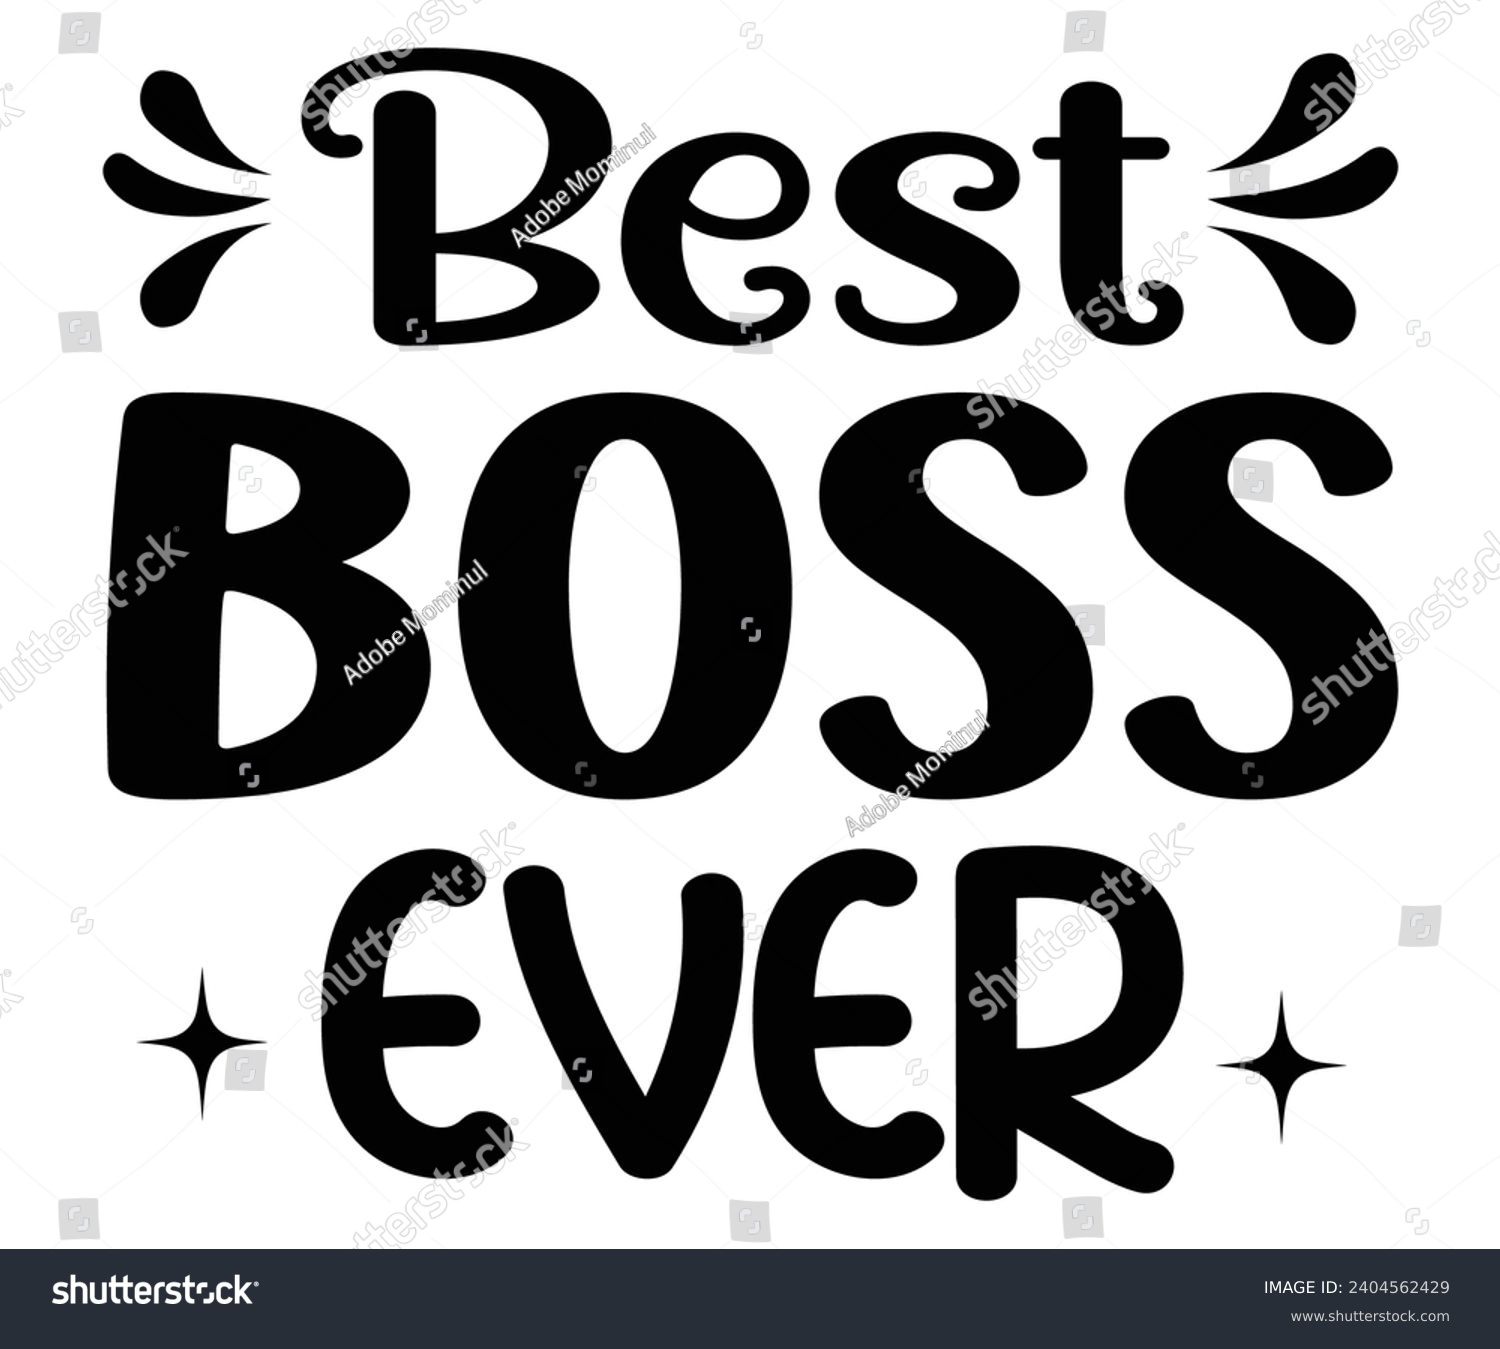 SVG of Best Boss Ever Svg,Happy Boss Day svg,Boss Saying Quotes,Boss Day T-shirt,Gift for Boss,Great Jobs,Happy Bosses Day t-shirt,Girl Boss Shirt,Motivational Boss,Cut File,Circut  svg